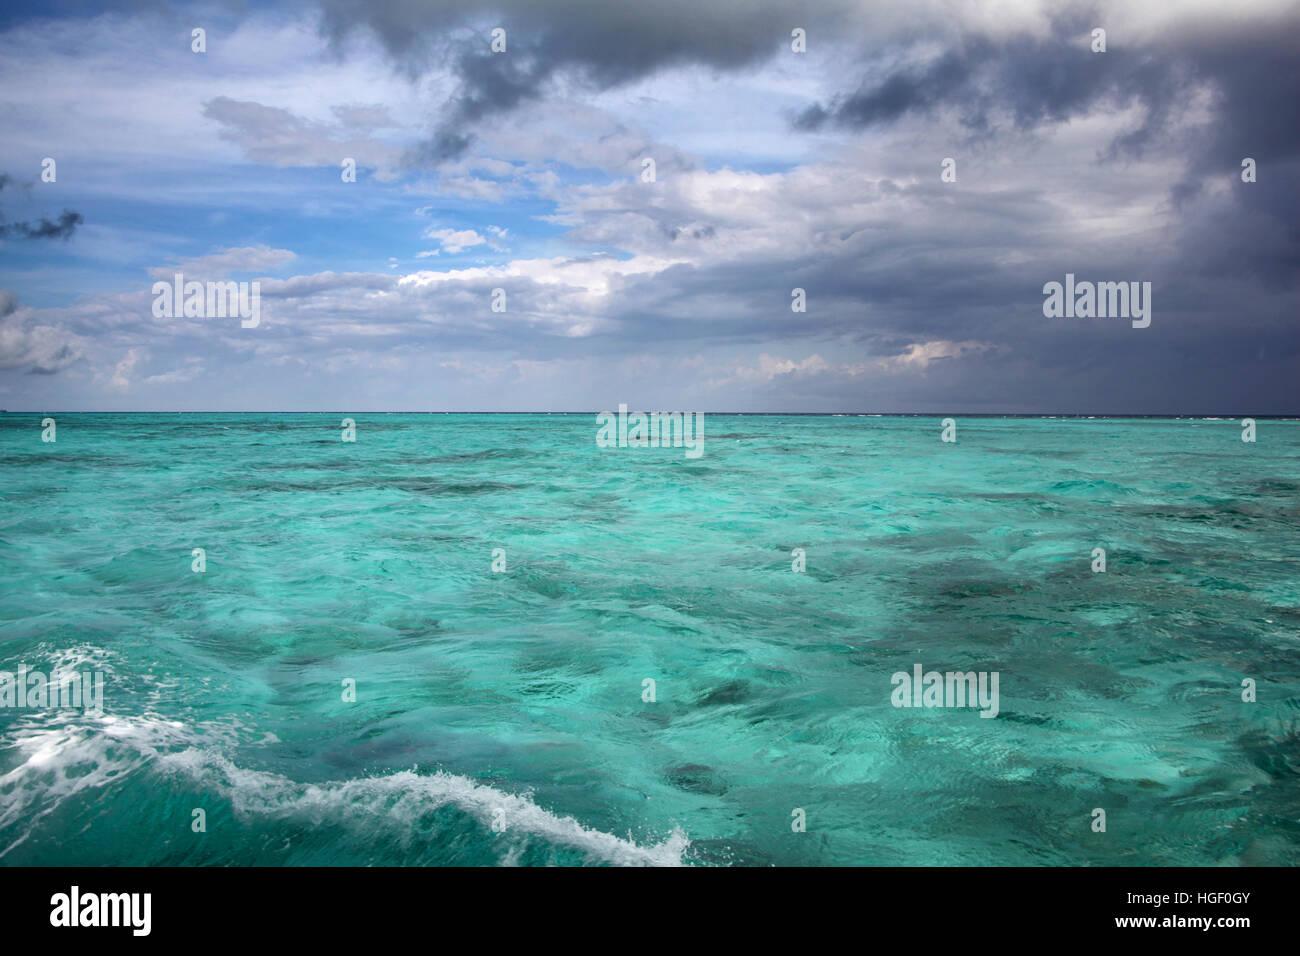 Stormy tropical sky over turquoise water, Caribbean sea off Grand Cayman. Stock Photo